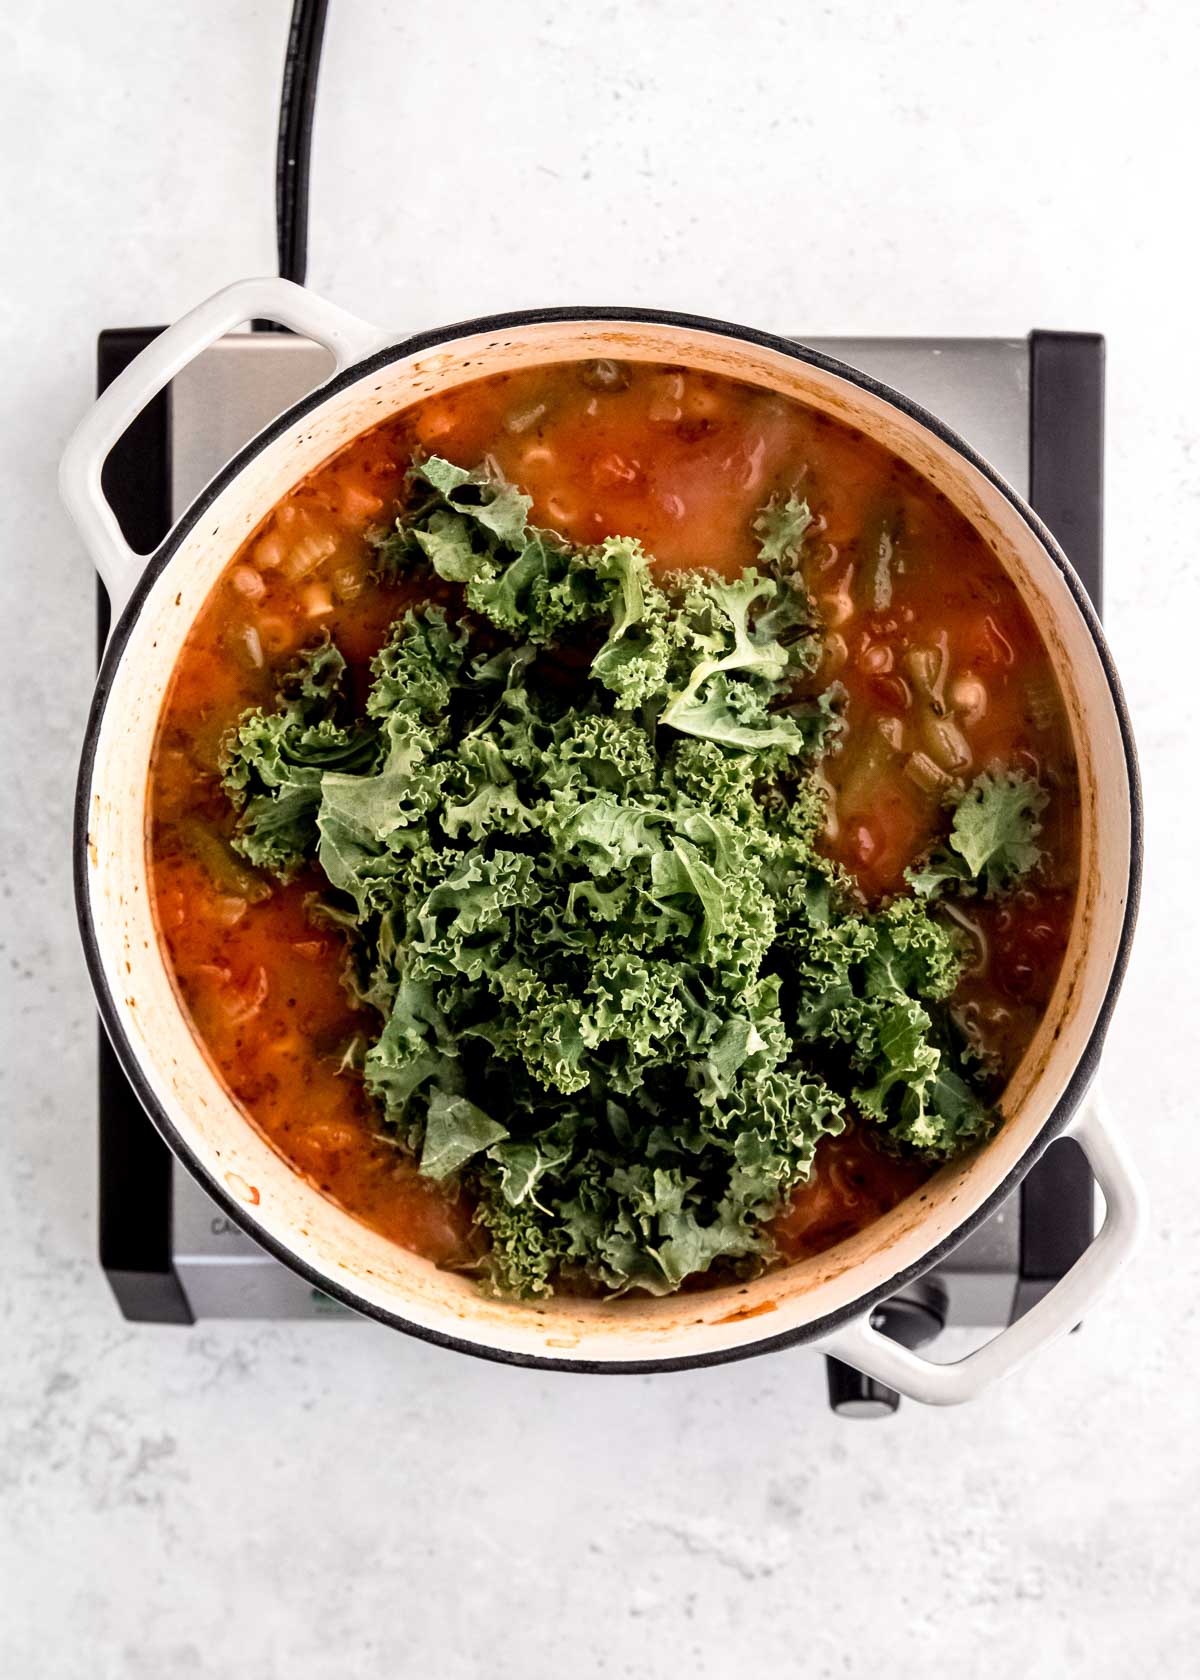 kale placed in the pot of minestrone soup